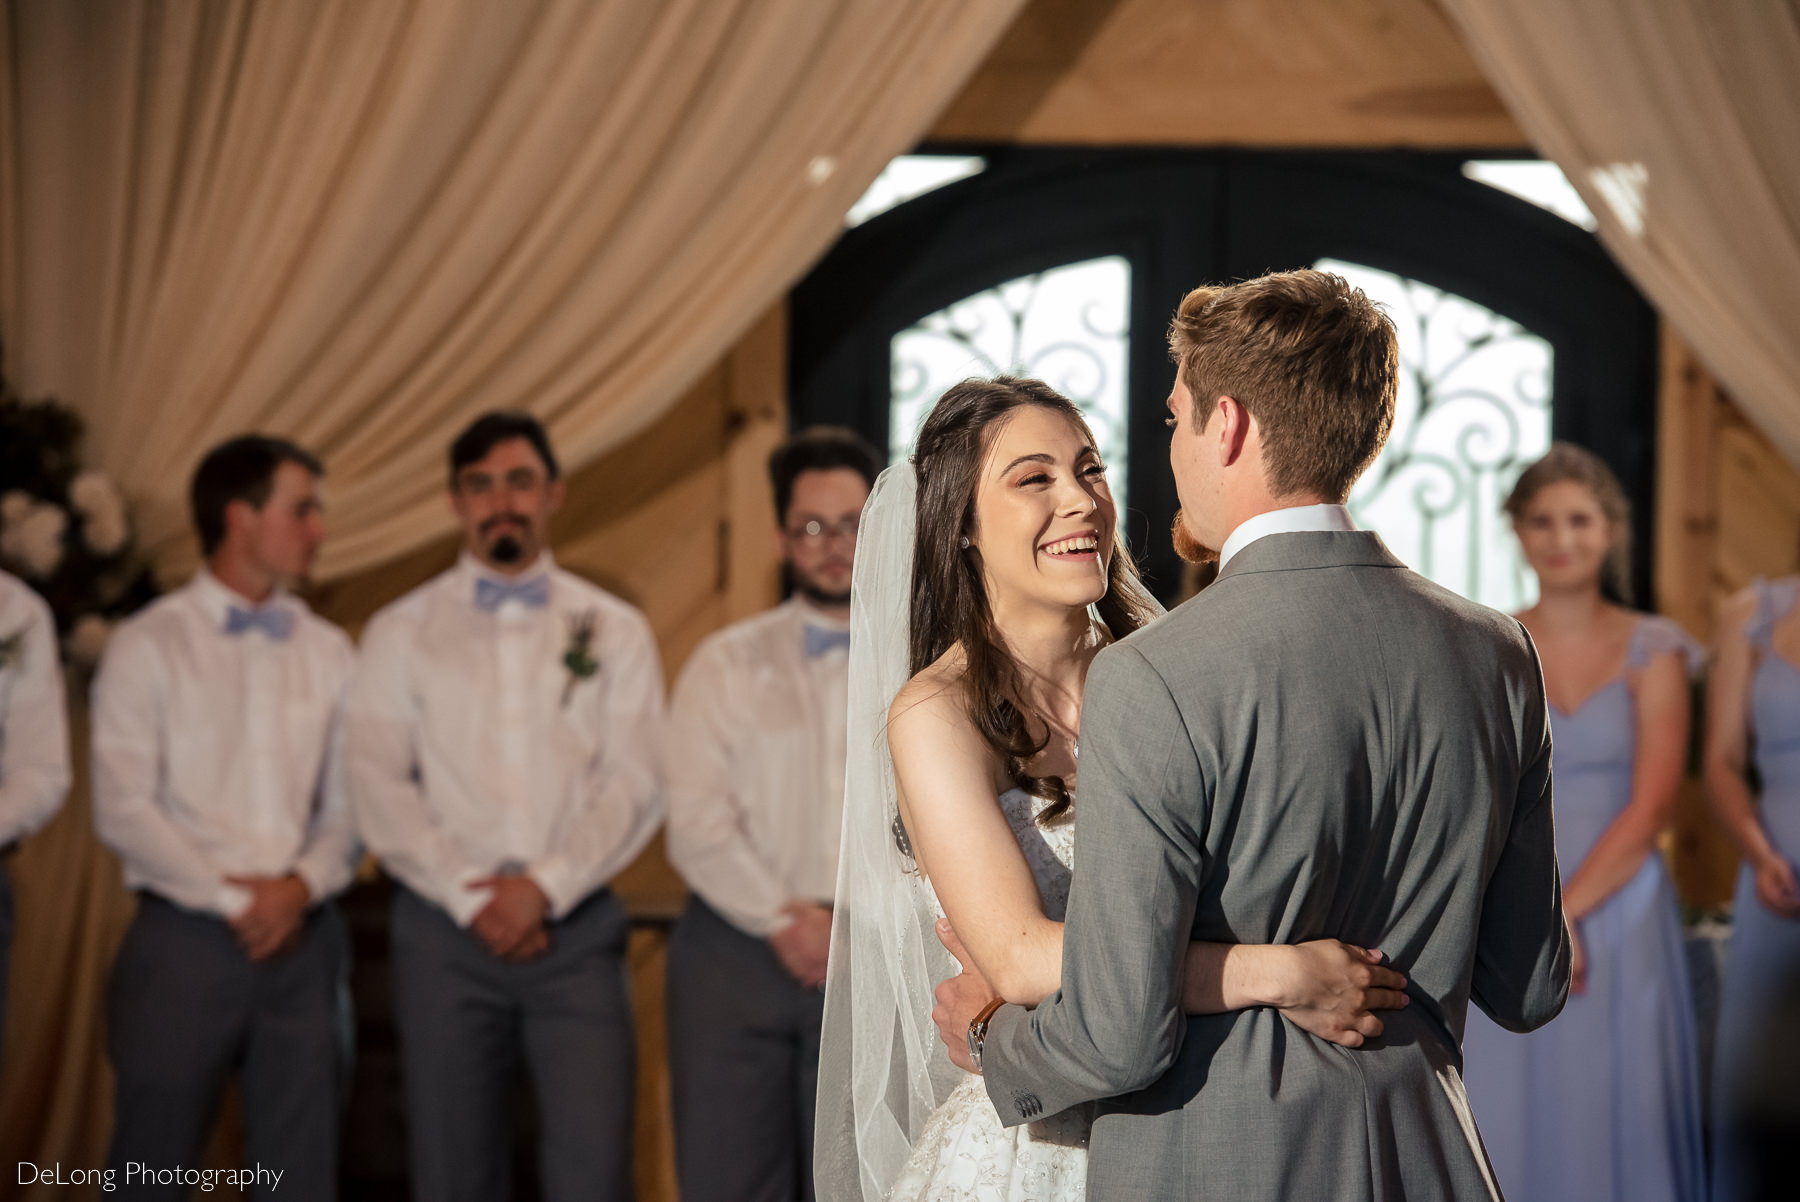 Bride giggling during her first dance with her groom with the wedding party in the background at Lady Bird Farms by Charlotte Wedding Photographers DeLong Photography